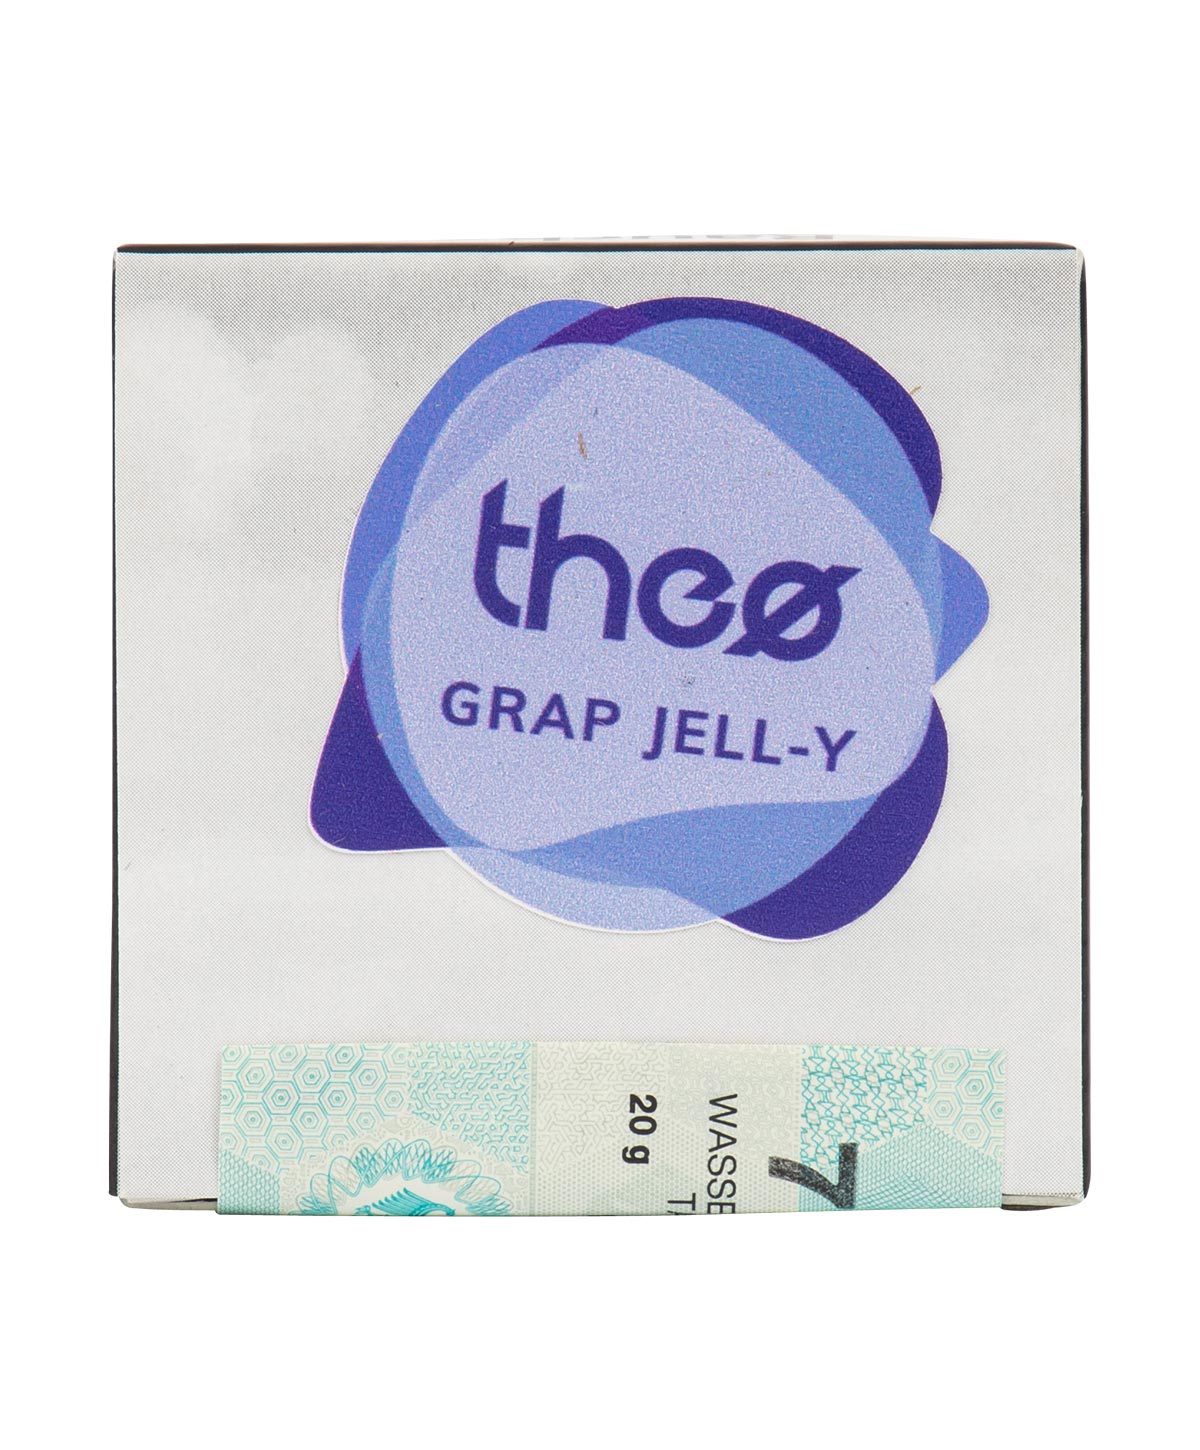 Theo Grape Jell- Y 20g